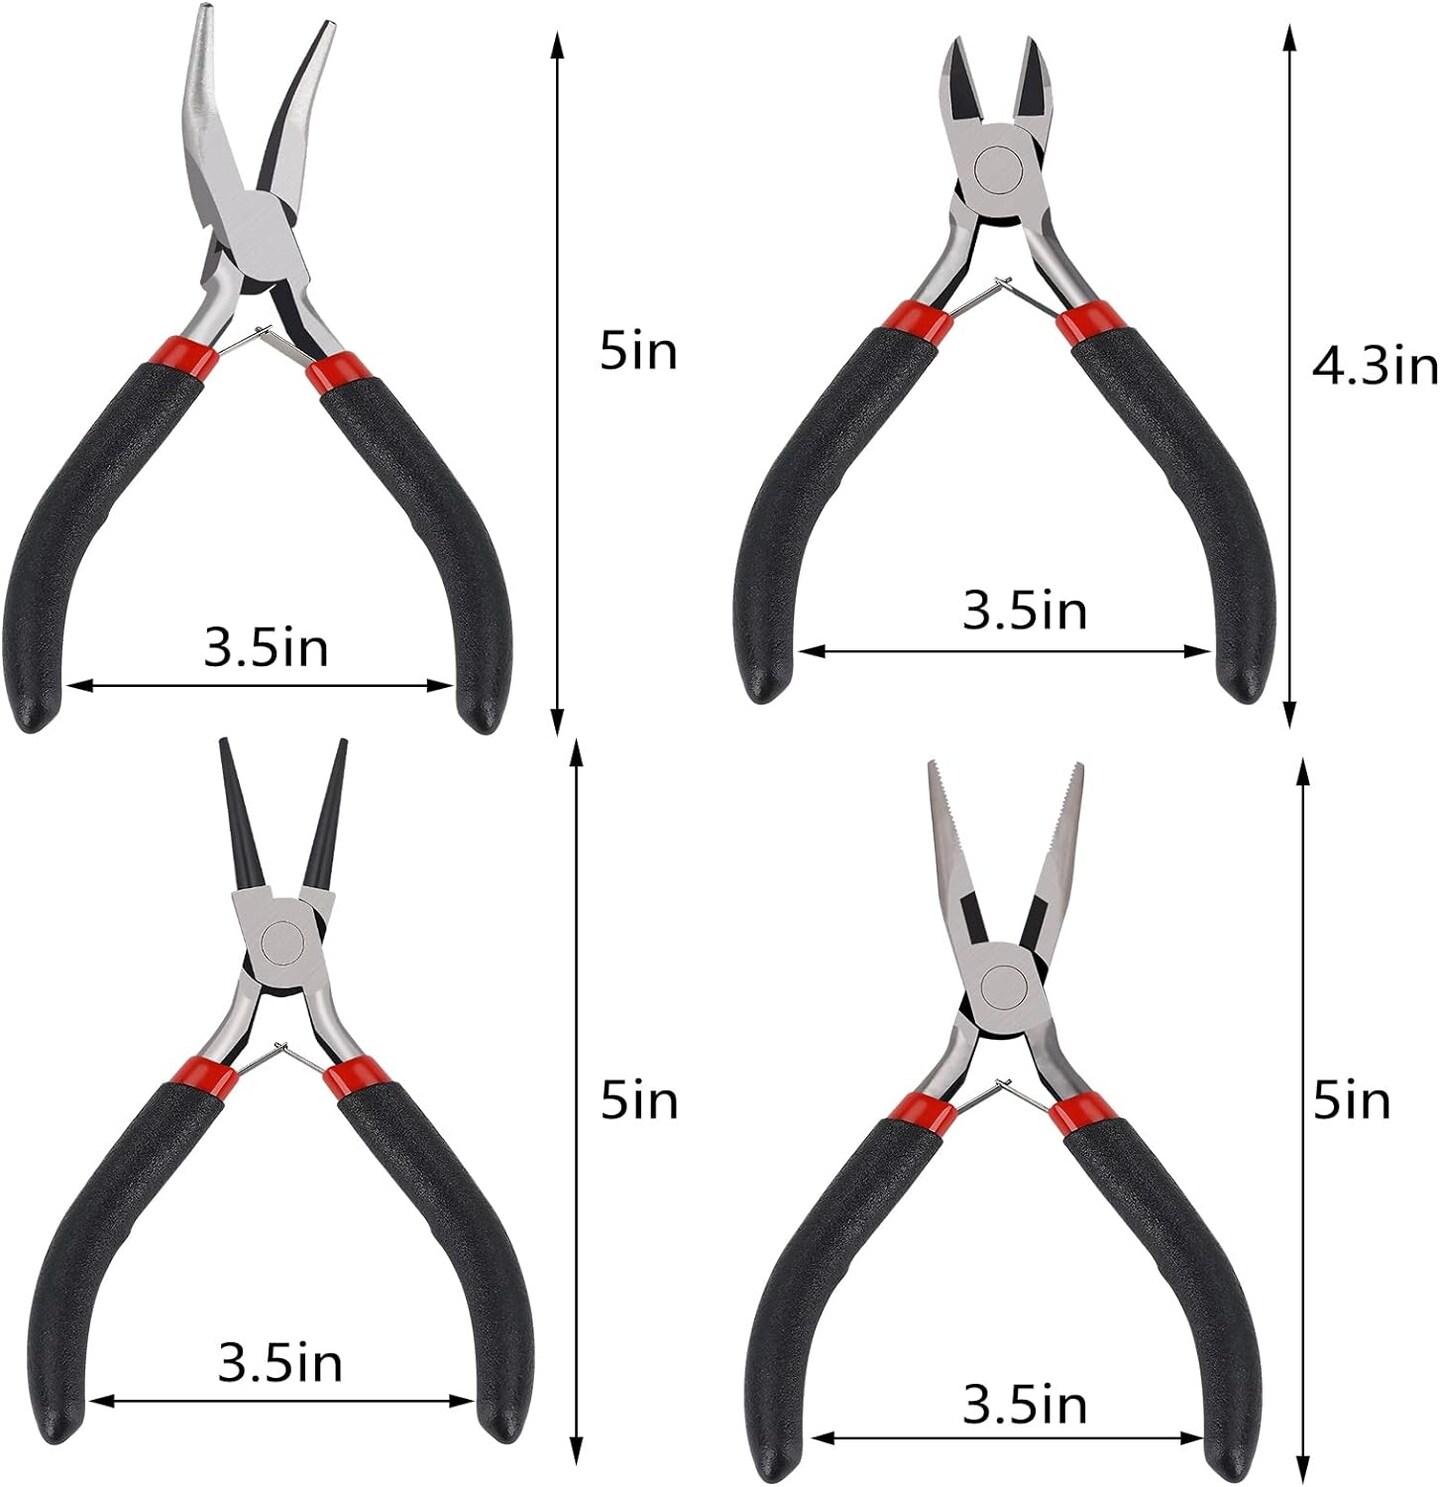 4 Pack Jewelry Pliers Jewelry Making Pliers Tools Kit with Needle Nose Pliers/Chain Nose Pliers, Round Nose Pliers, Bent Nose Pliers Wire Cutters for Wire Wrapping Earring Craft Making Supplies,Black